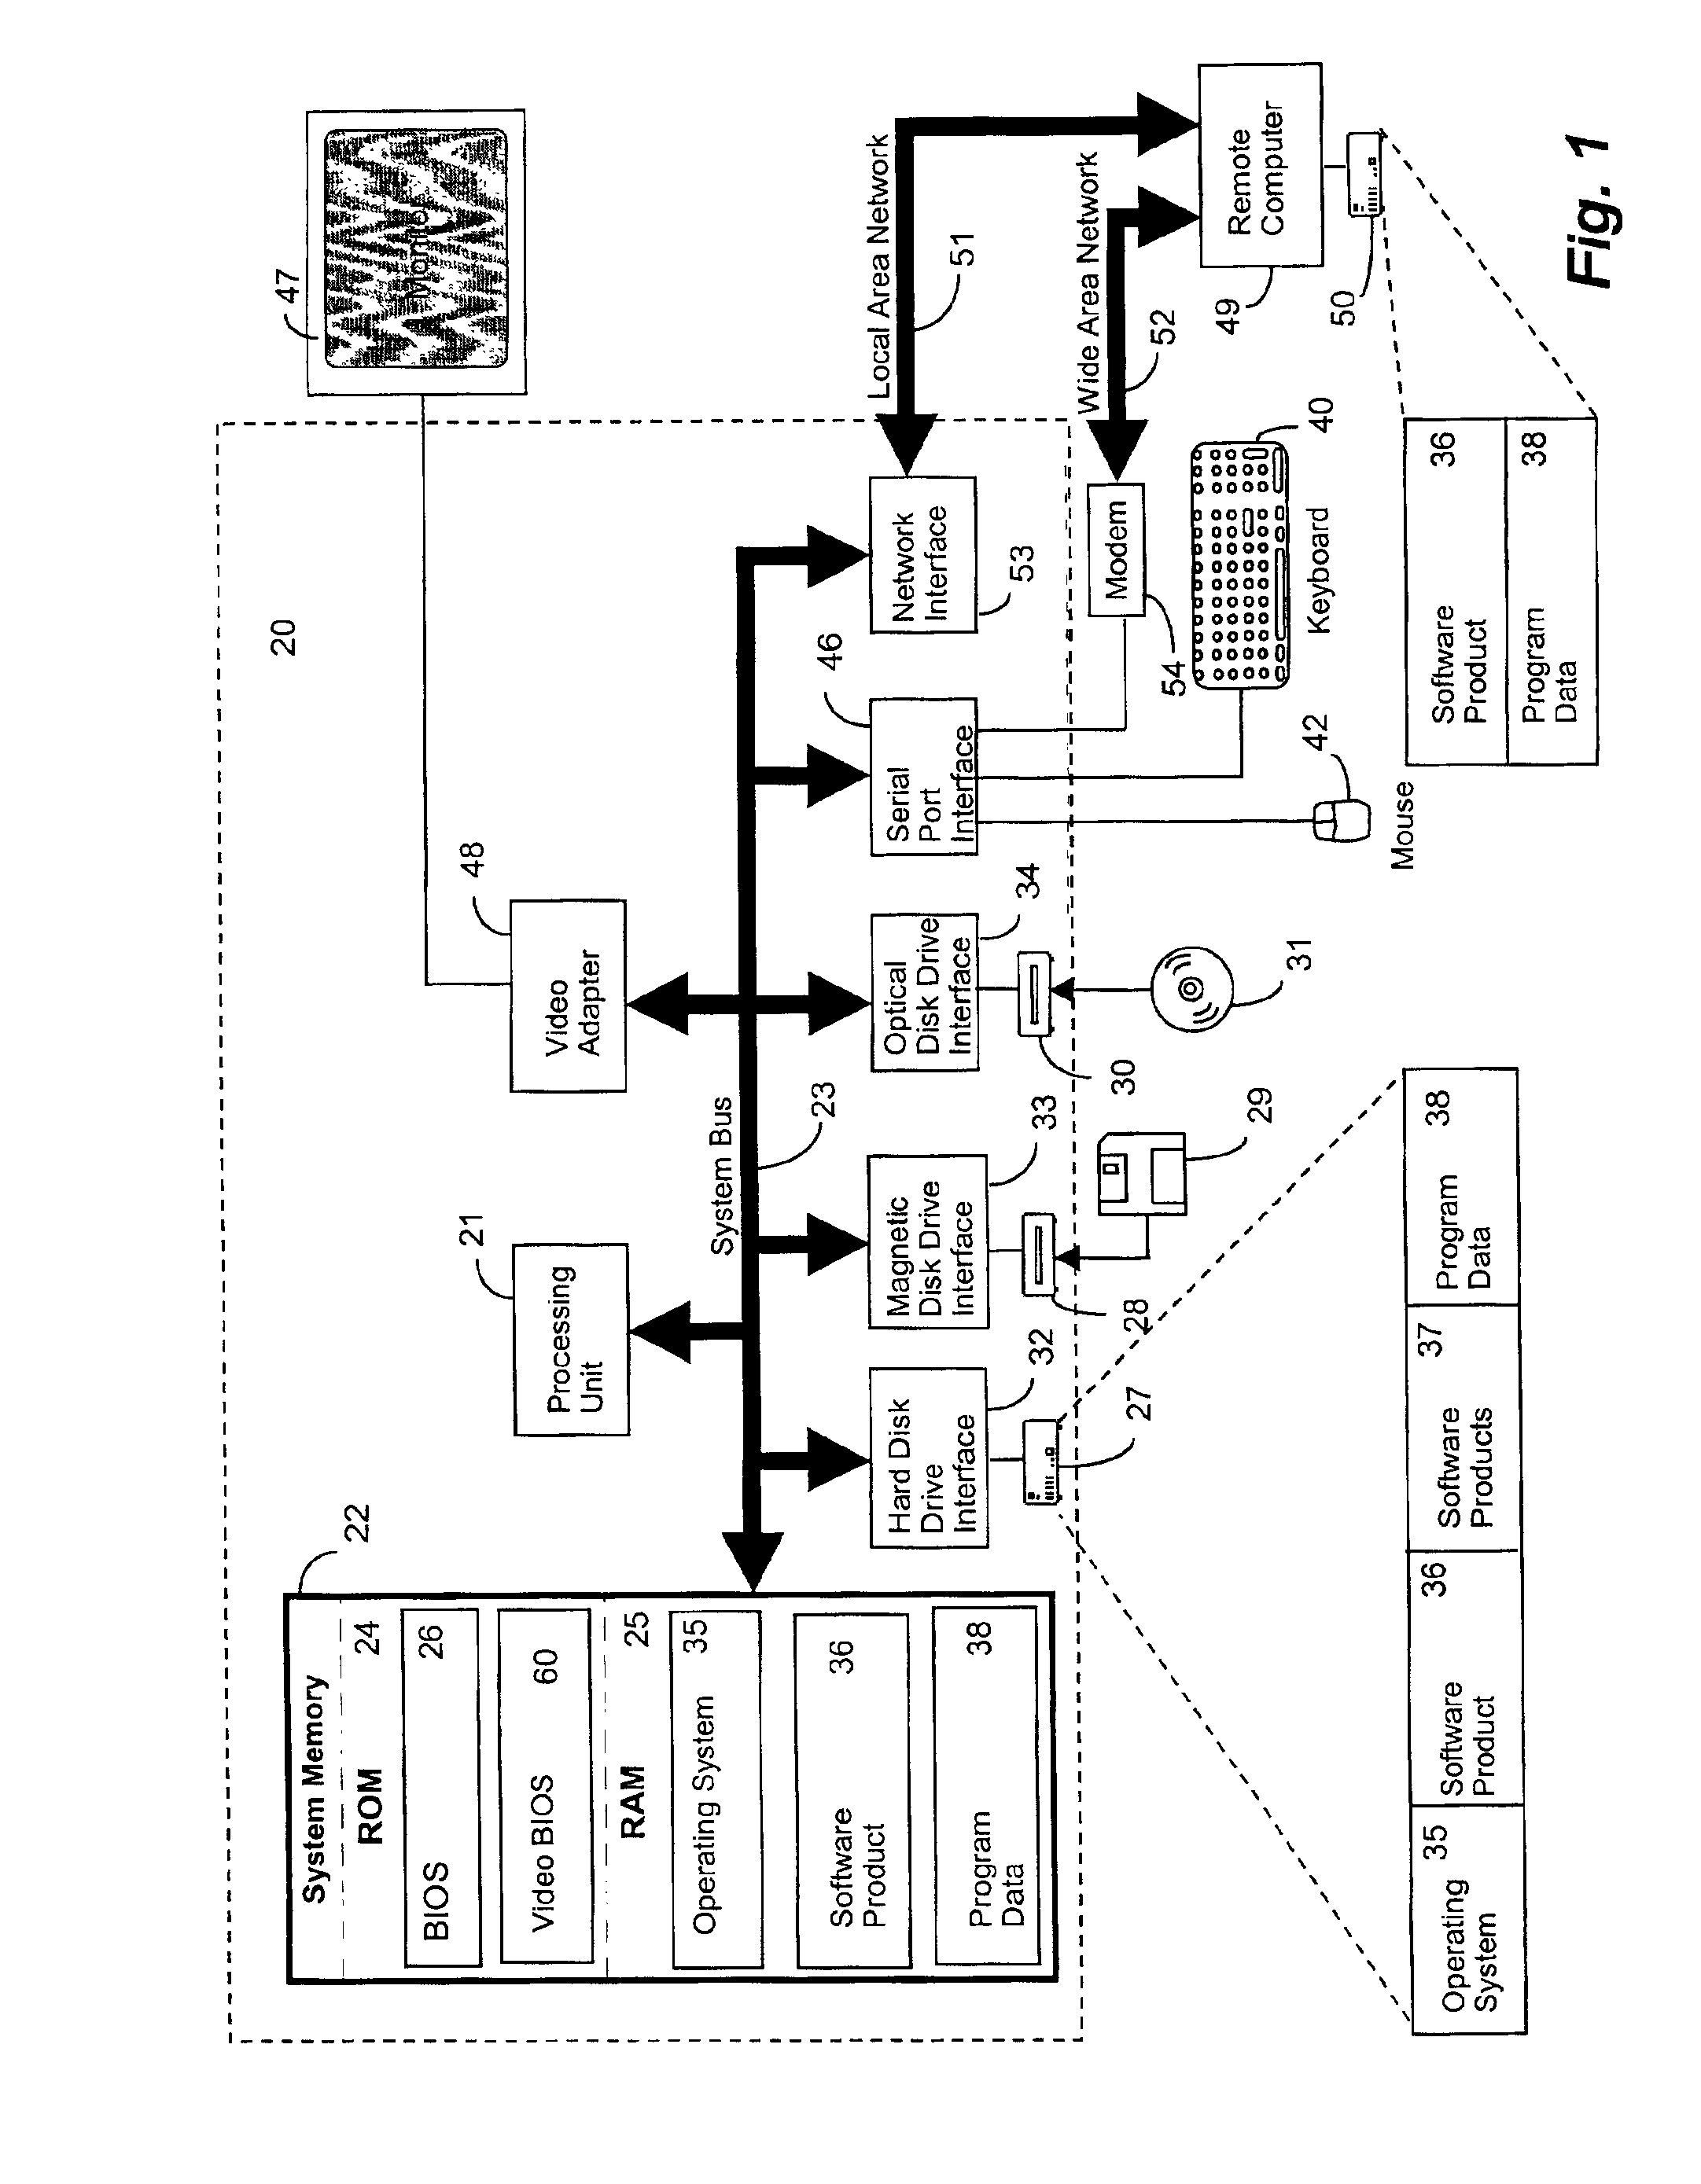 Method and system for licensing a software product